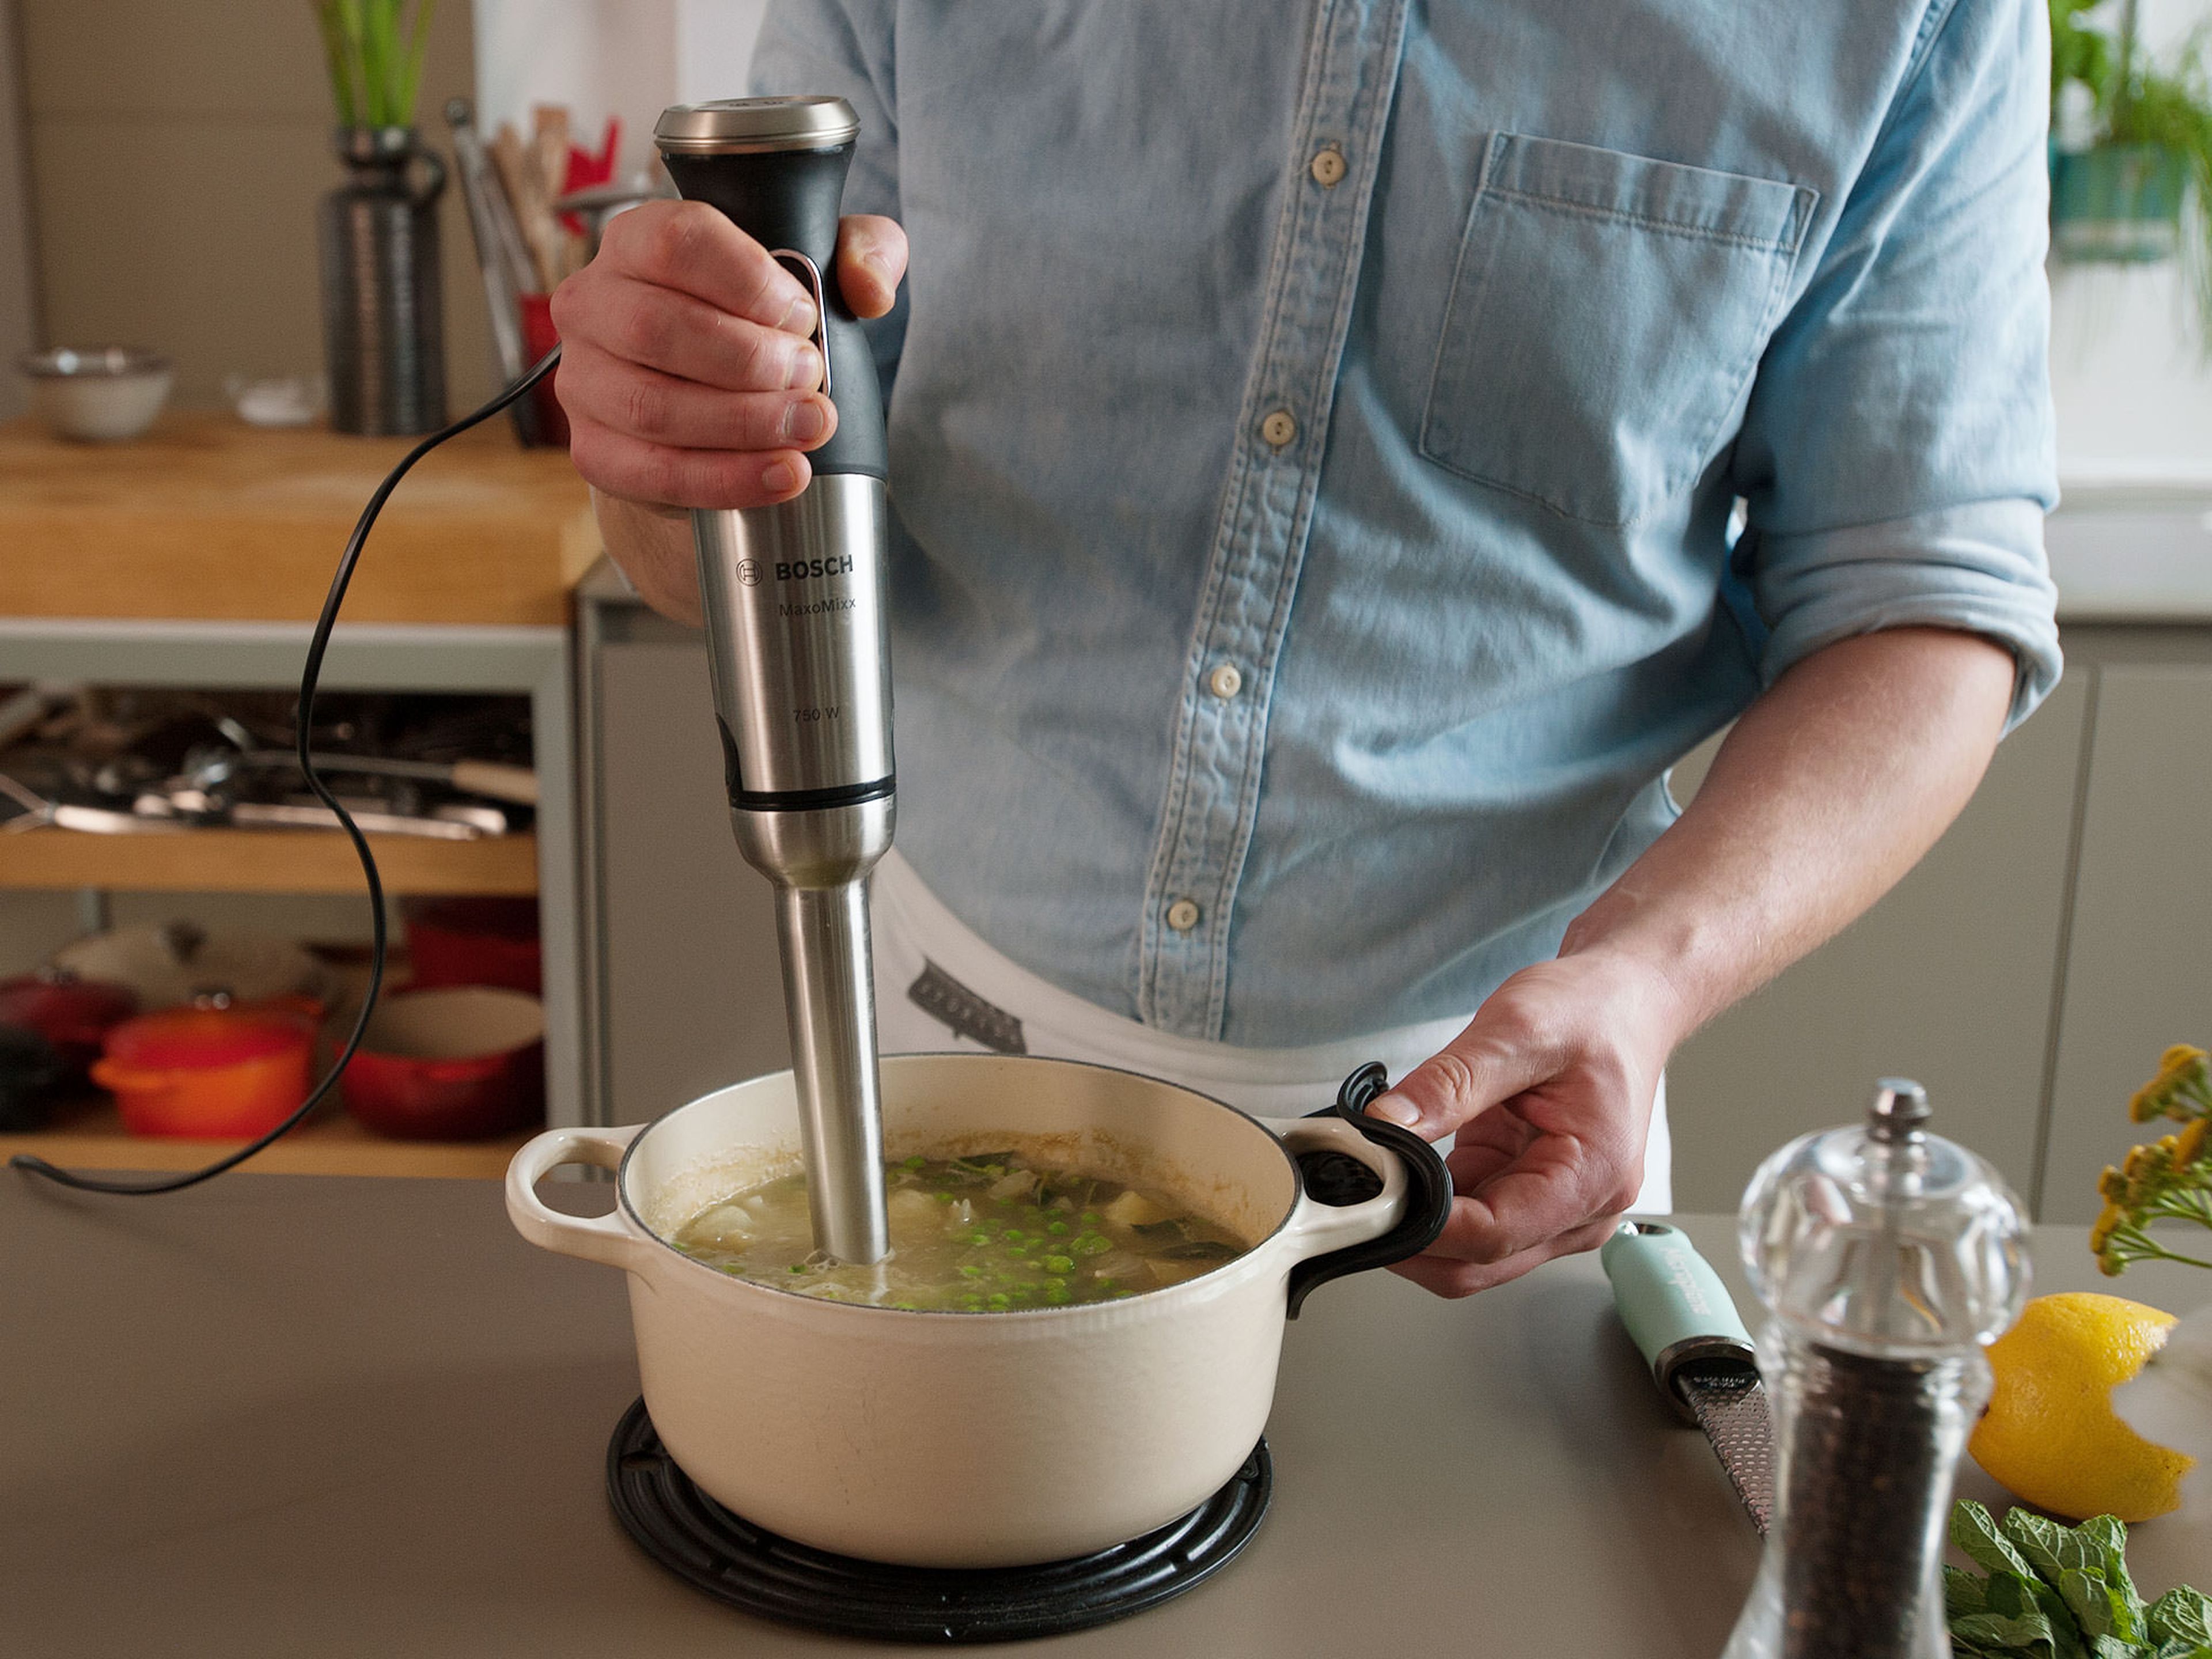 Deglaze with vegetable stock, bring to a boil, then reduce heat and let simmer for approx. 10 – 15 min., until potatoes are cooked through. Add remaining frozen peas. Remove from heat and purée with a hand blender.